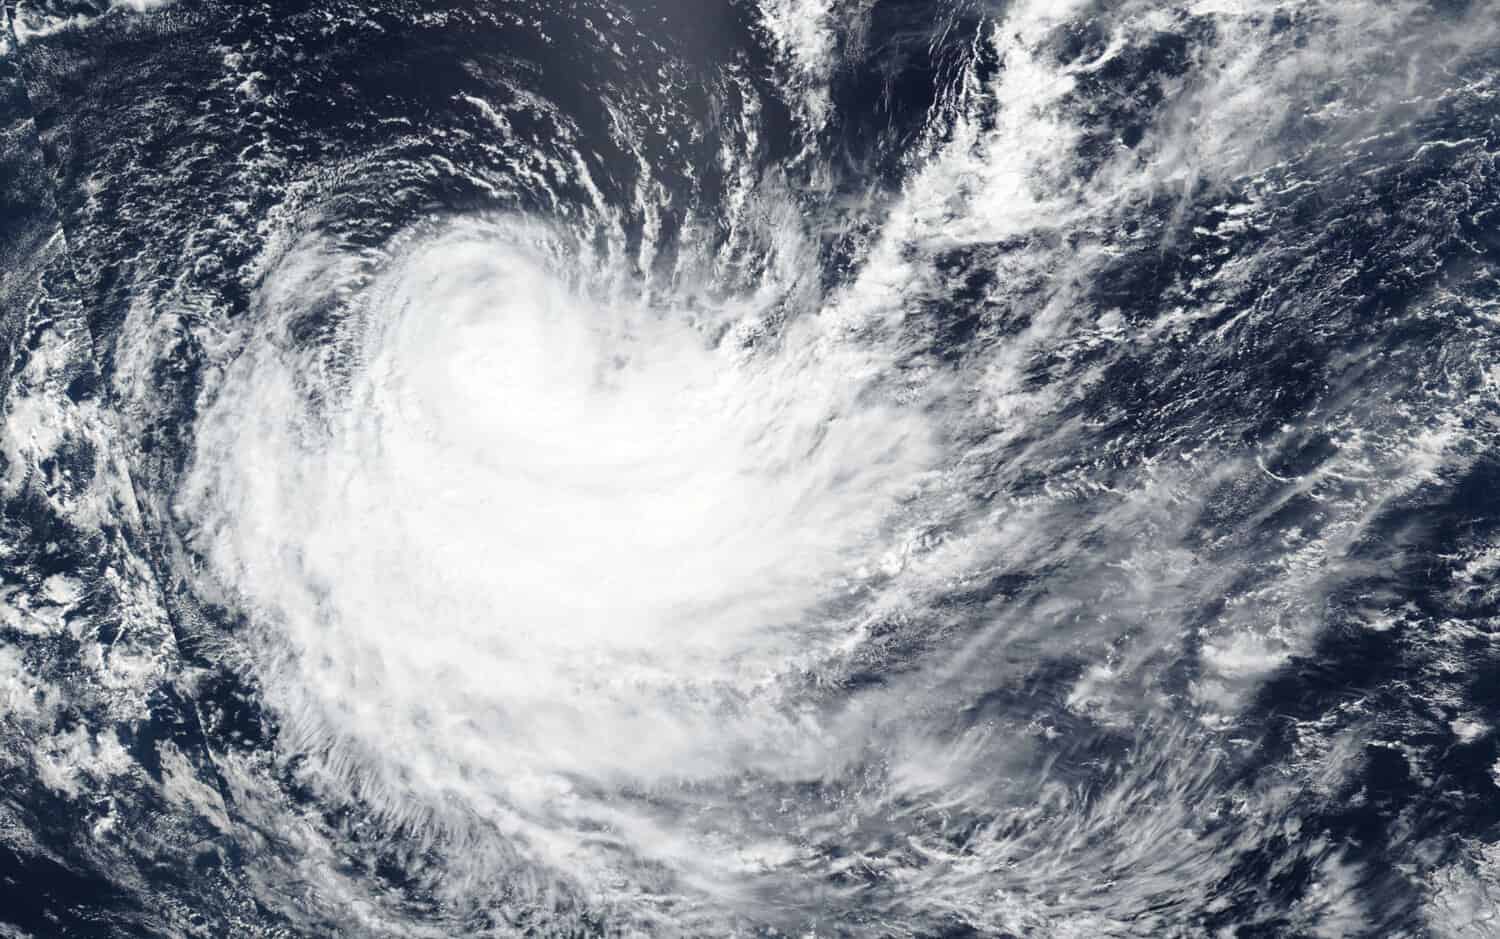 Cyclone Idai could have been engineered by western military as geophysical warfare